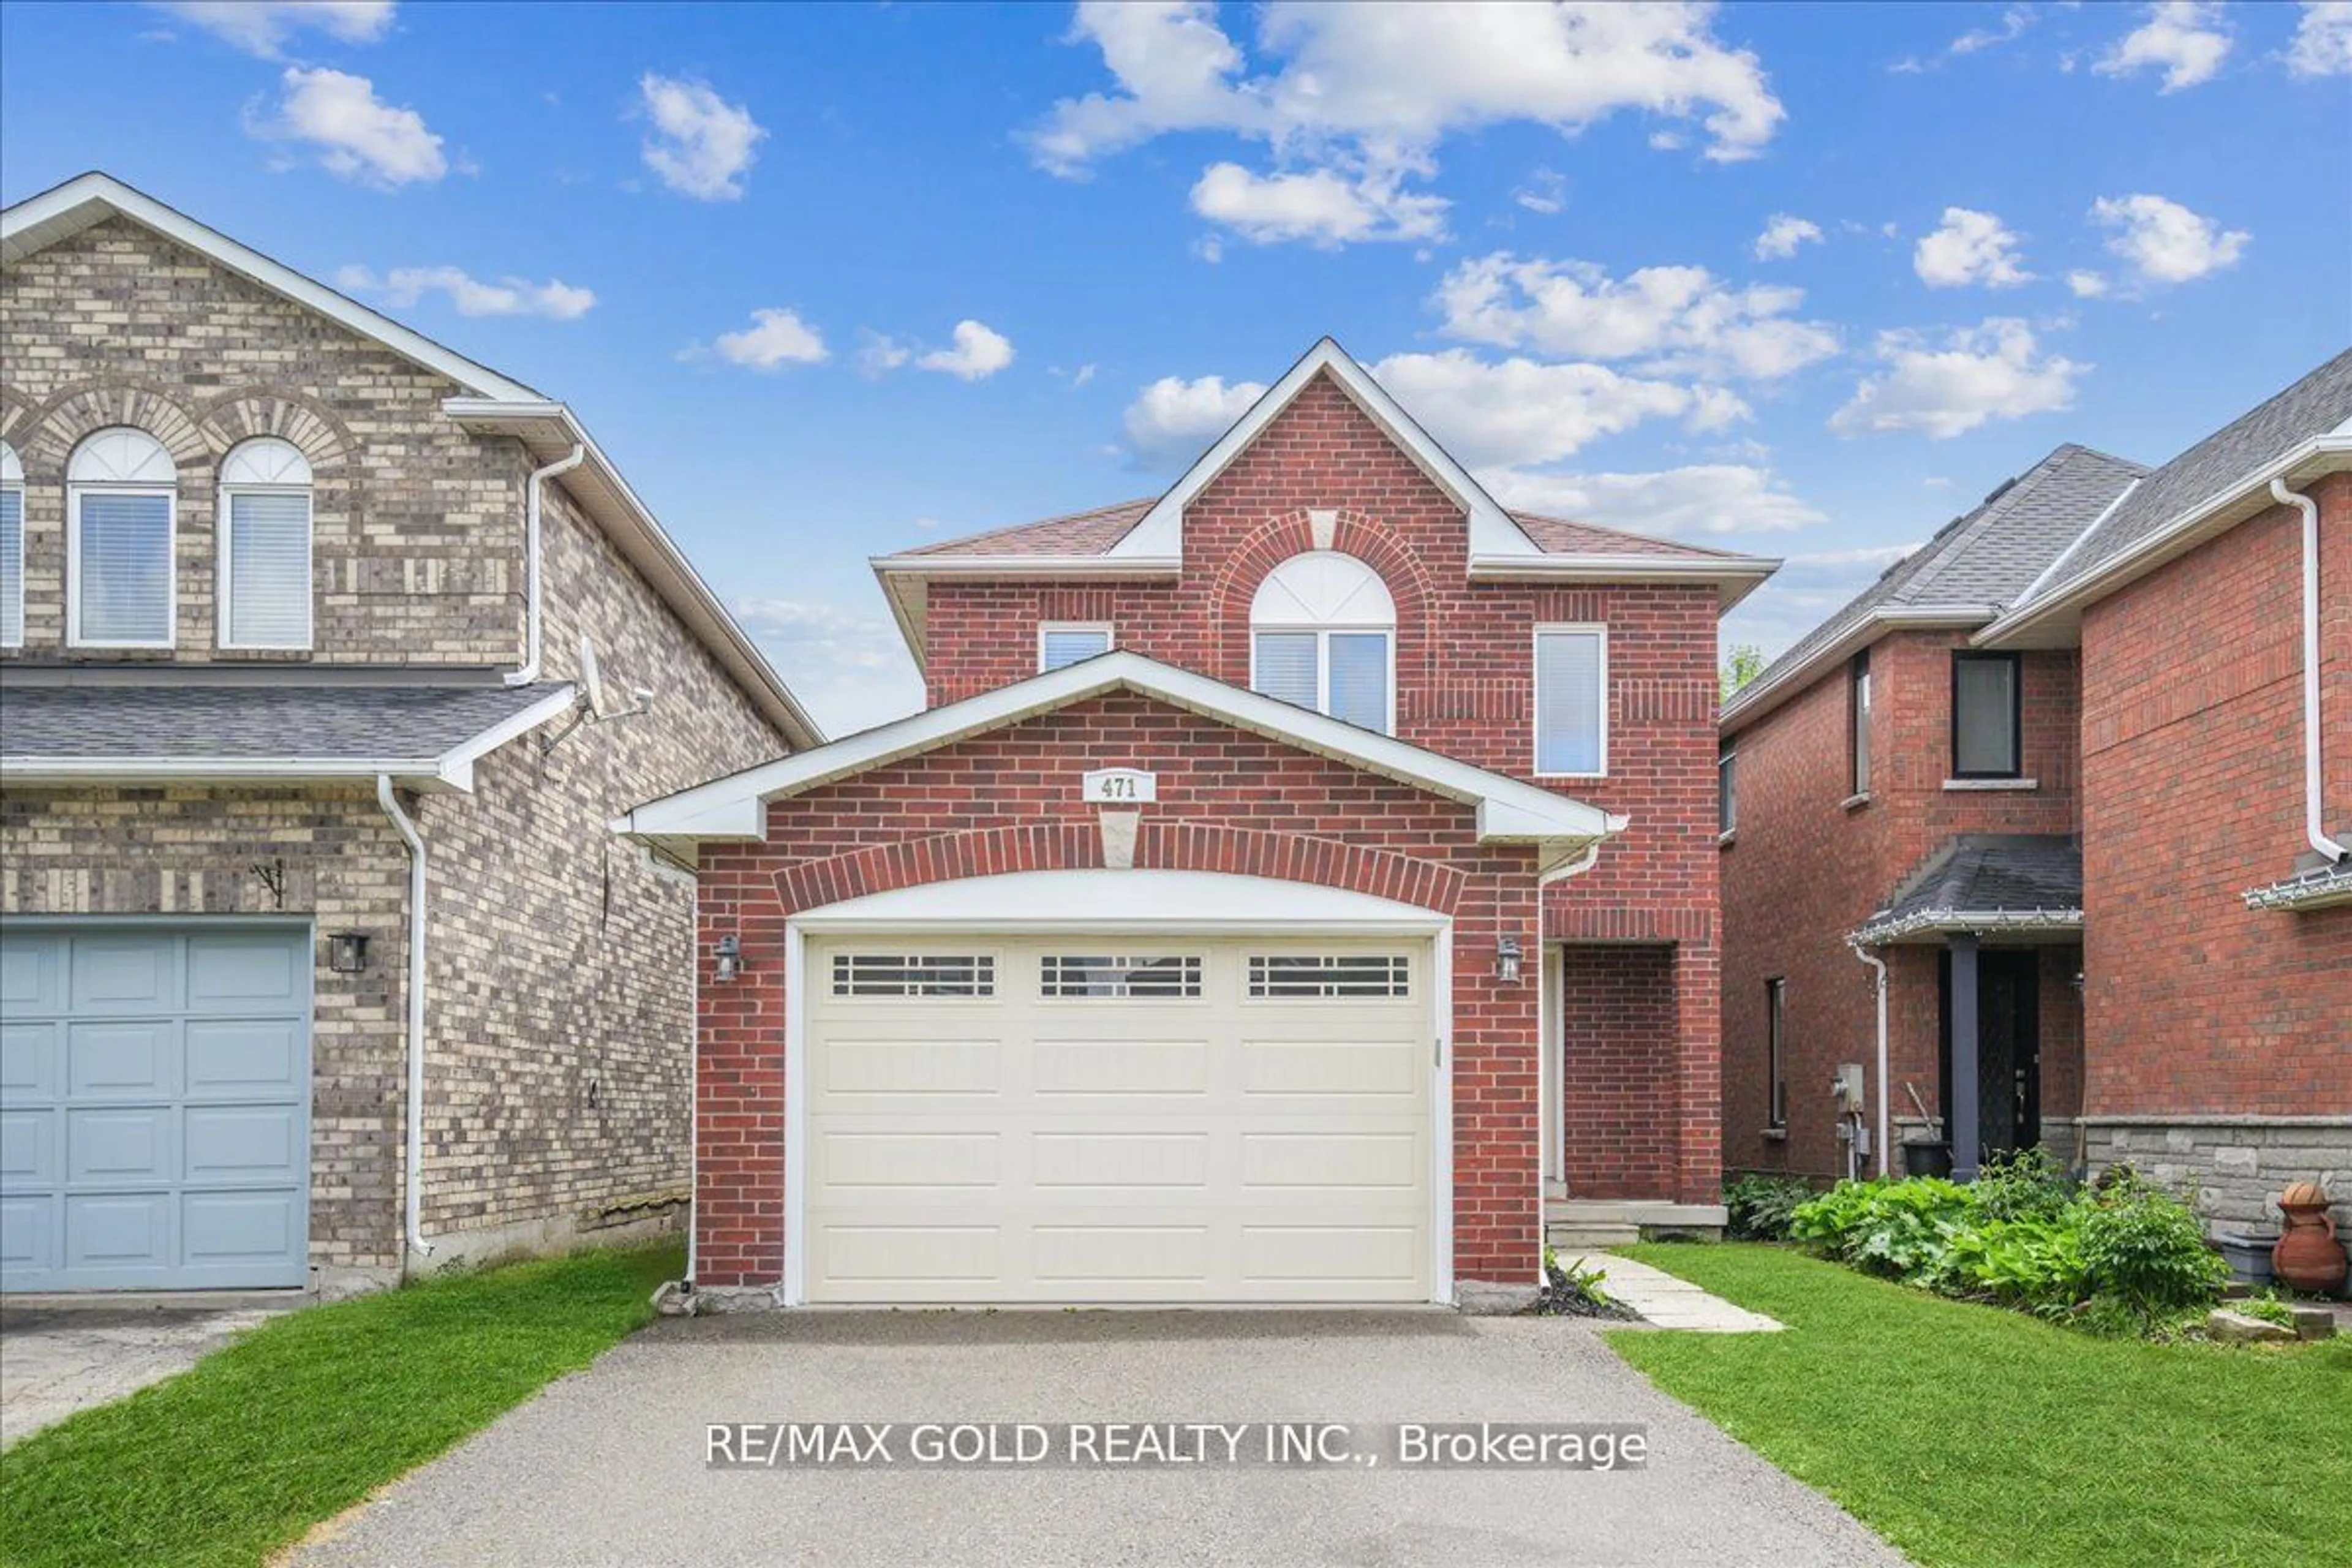 Home with brick exterior material for 471 Jay Cres, Orangeville Ontario L9W 4Y8